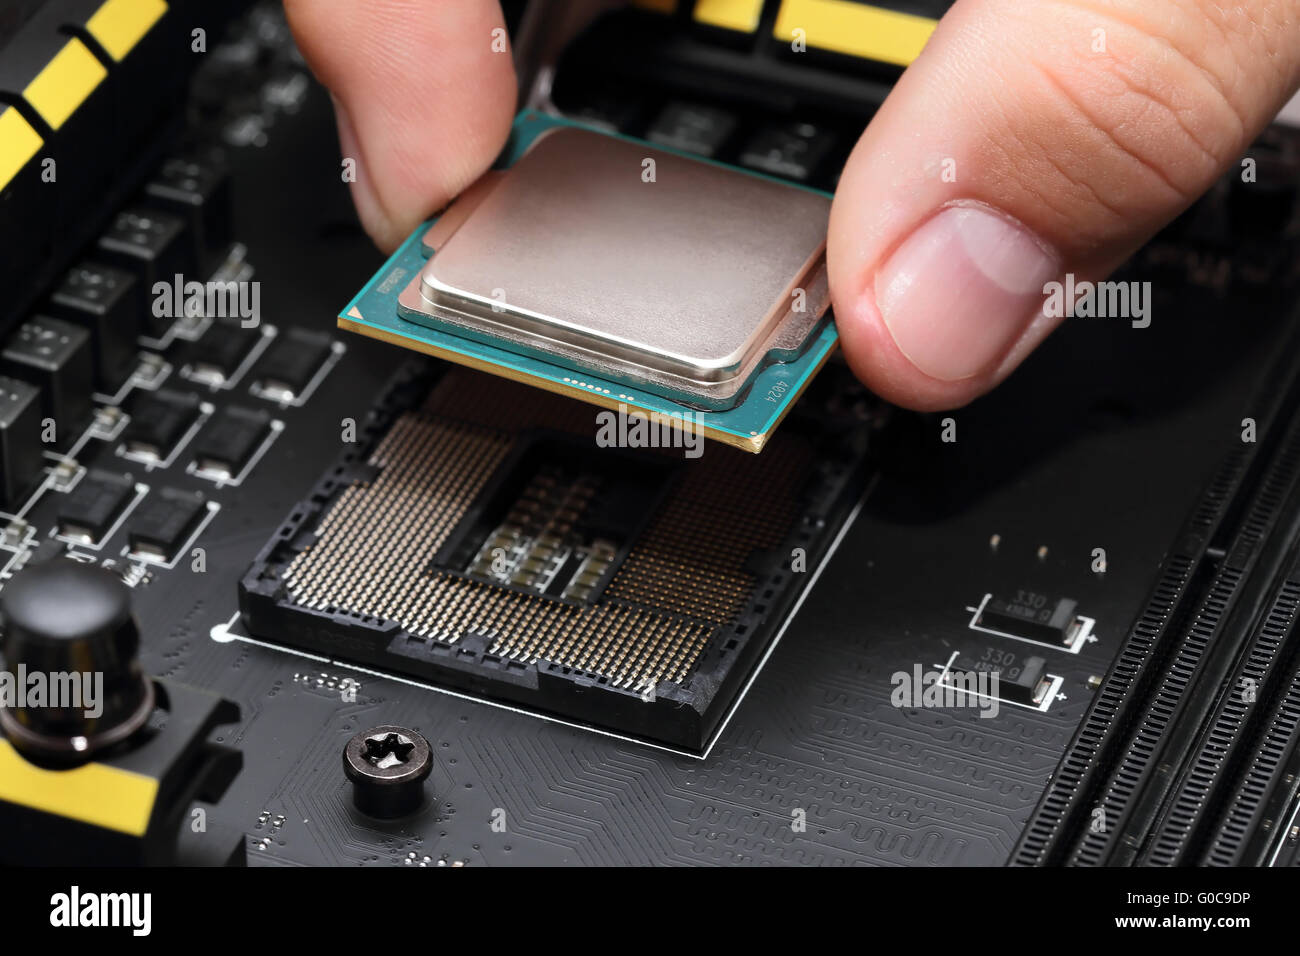 Installing central processor unit into motherboard Stock Photo